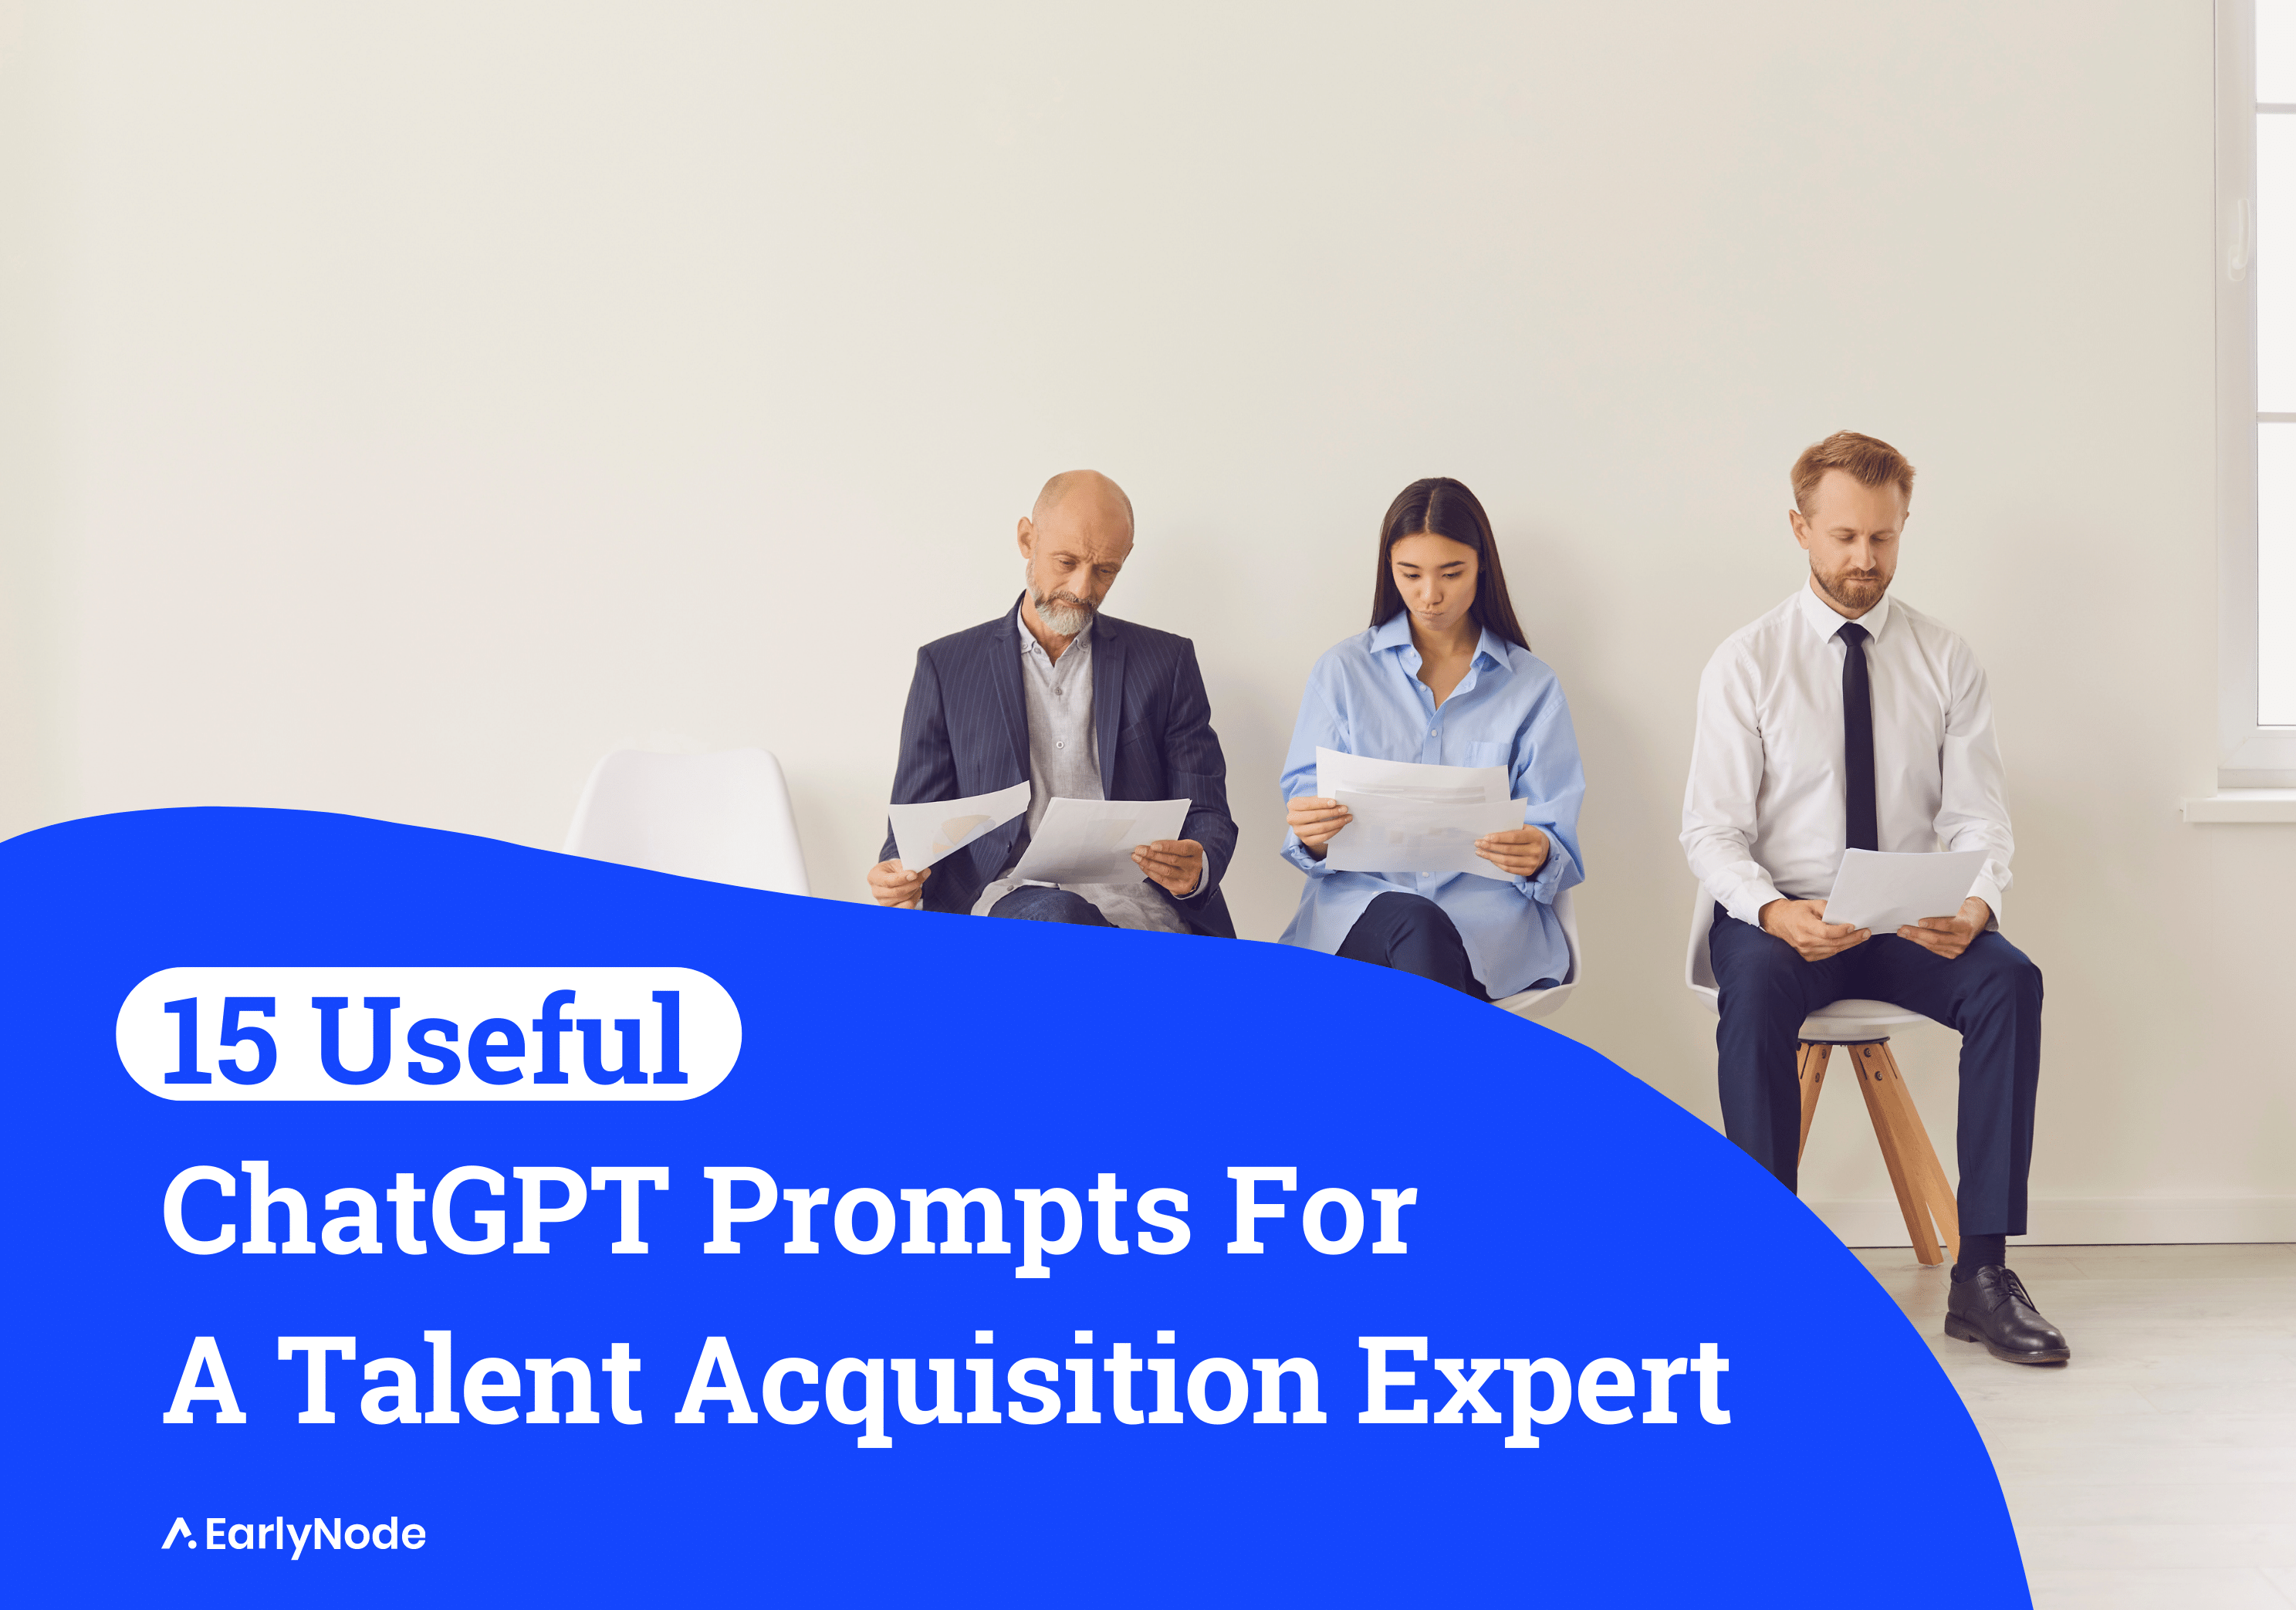 15 Useful ChatGPT Prompts for Talent Acquisition Experts